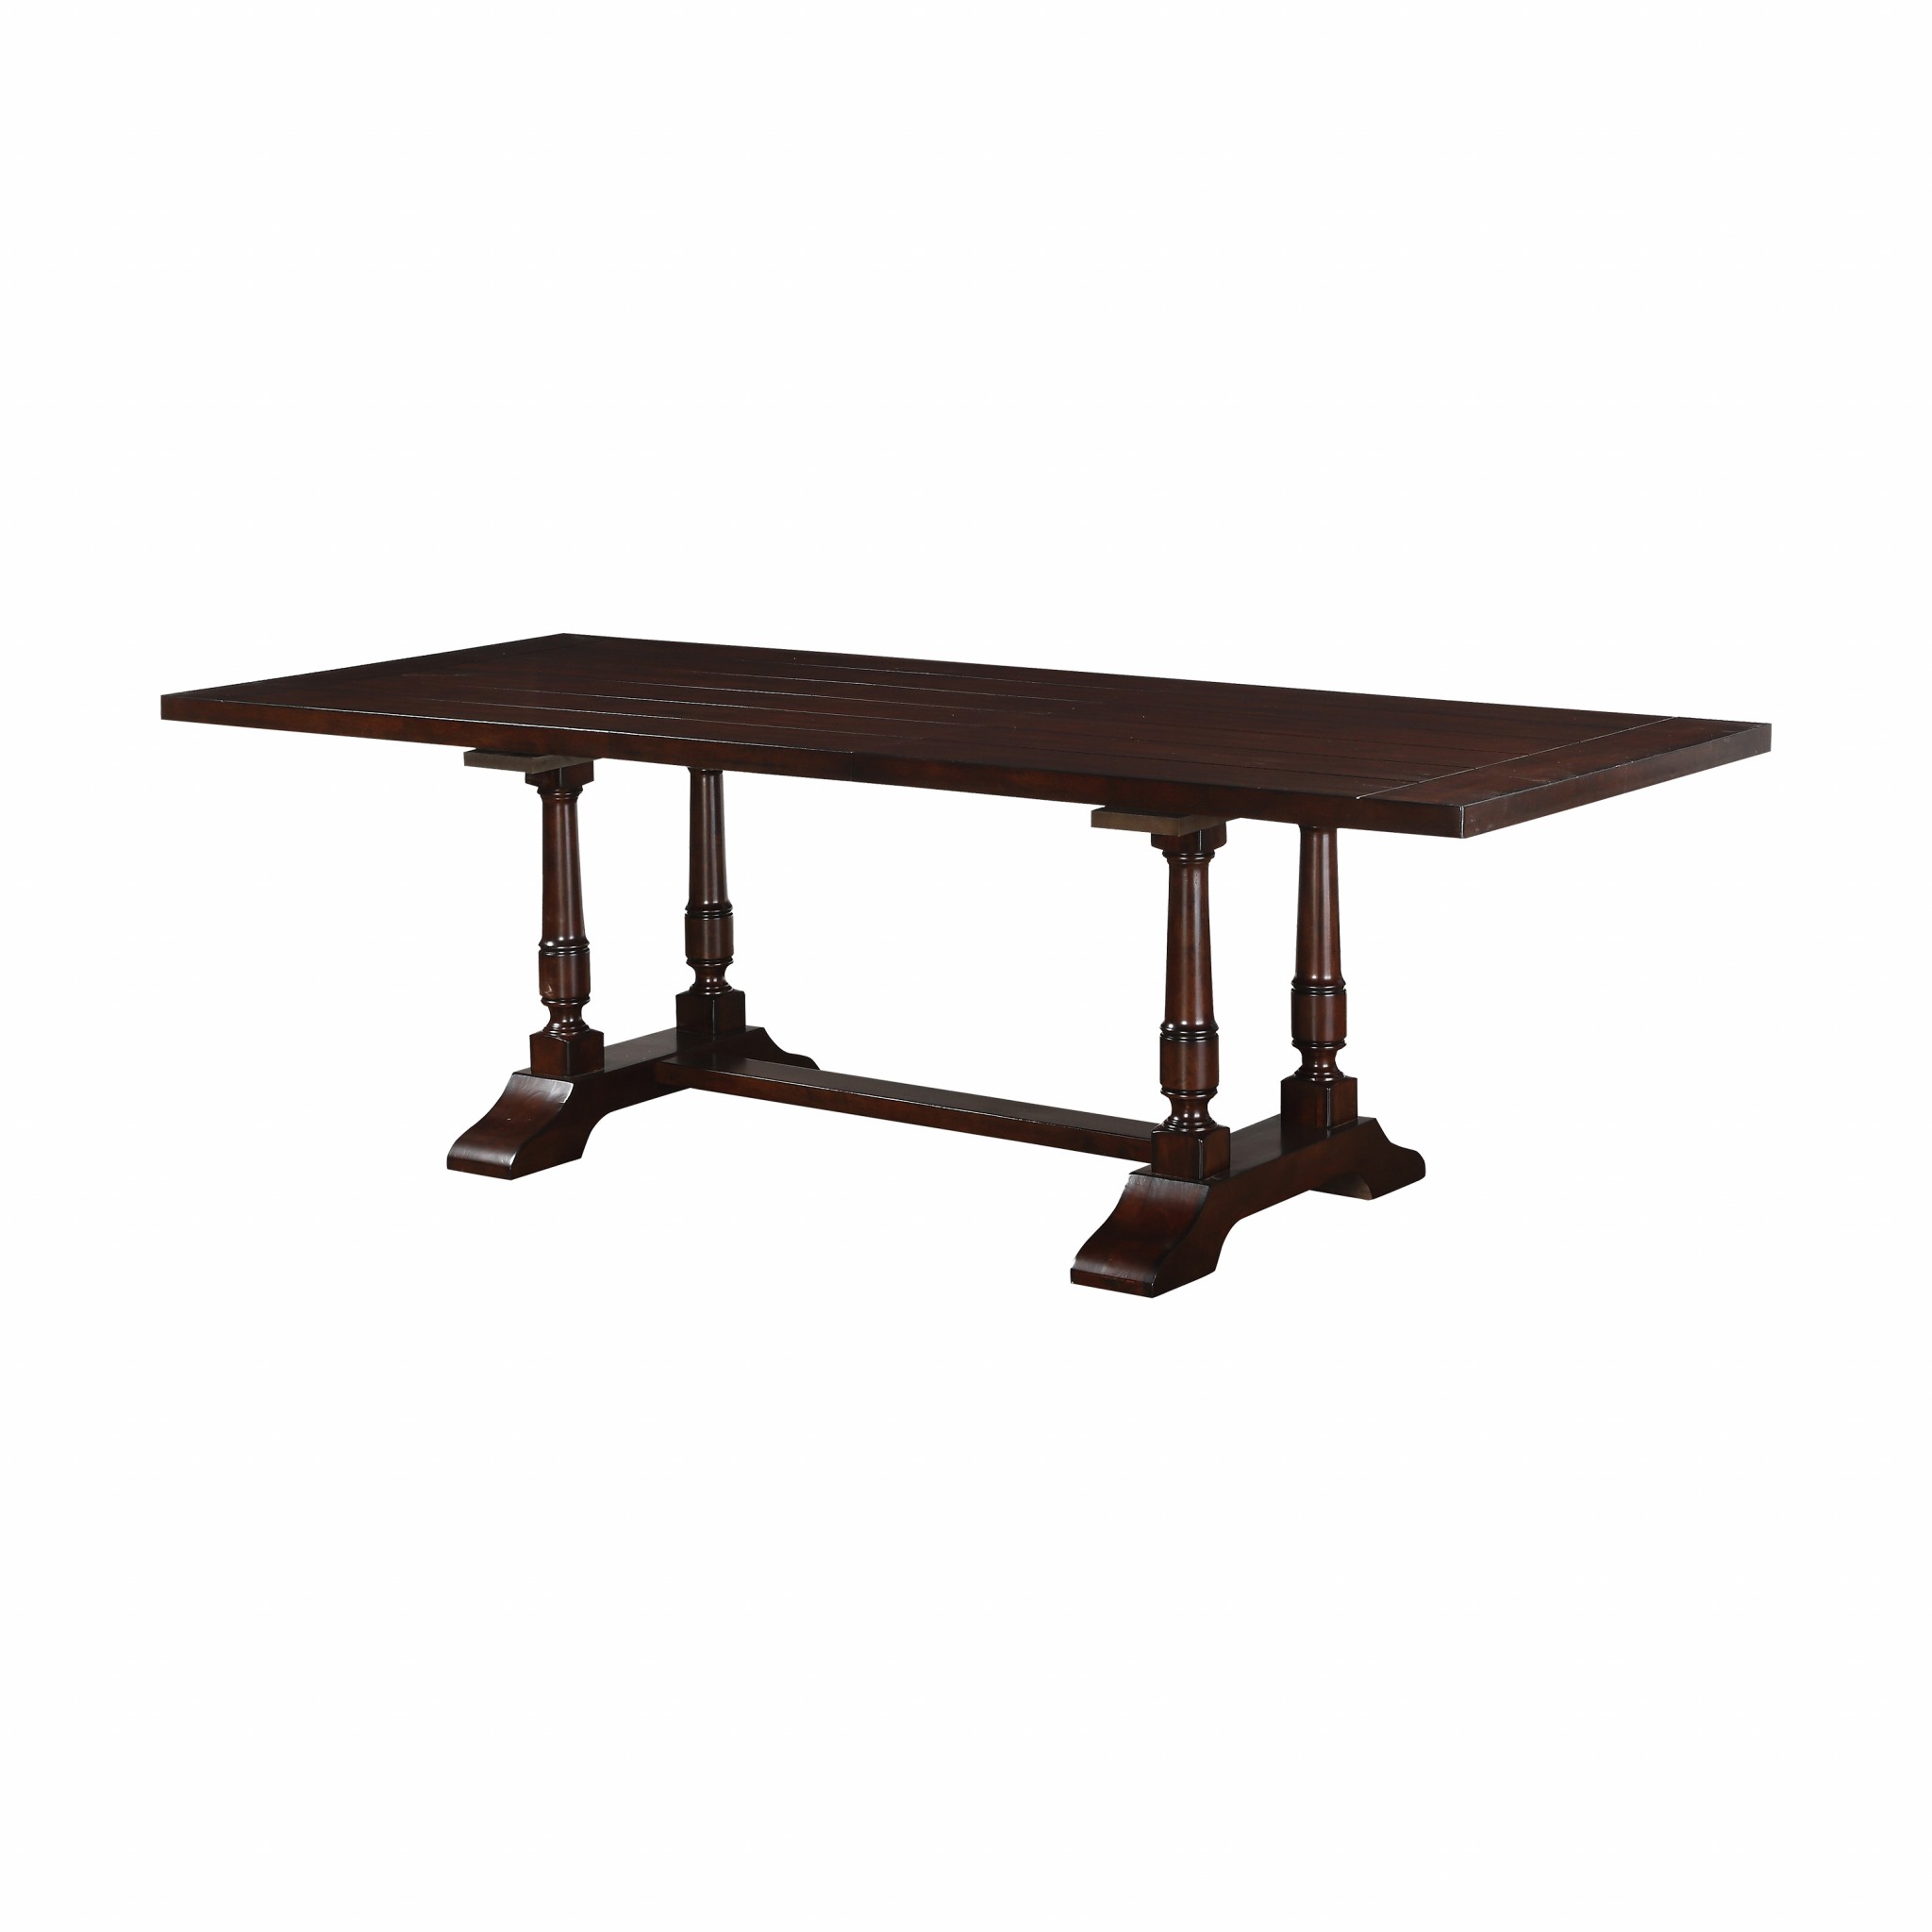 40" X 96" X 30" Cherry Wood Dining table. Rectangular Trestle Table with 4 Turned Supports